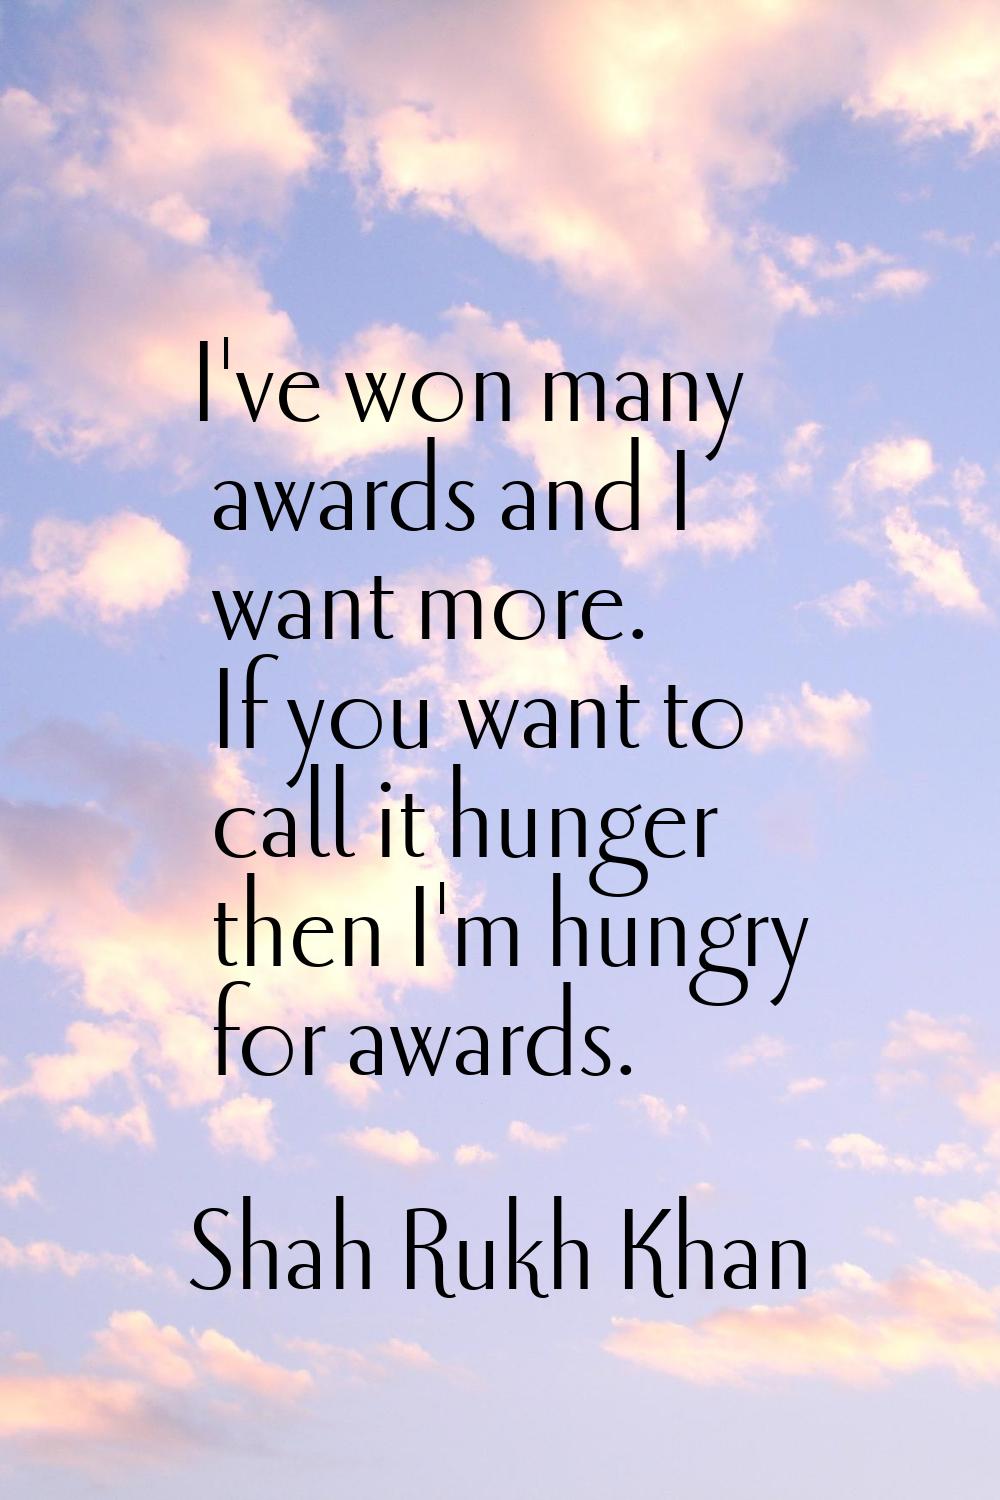 I've won many awards and I want more. If you want to call it hunger then I'm hungry for awards.